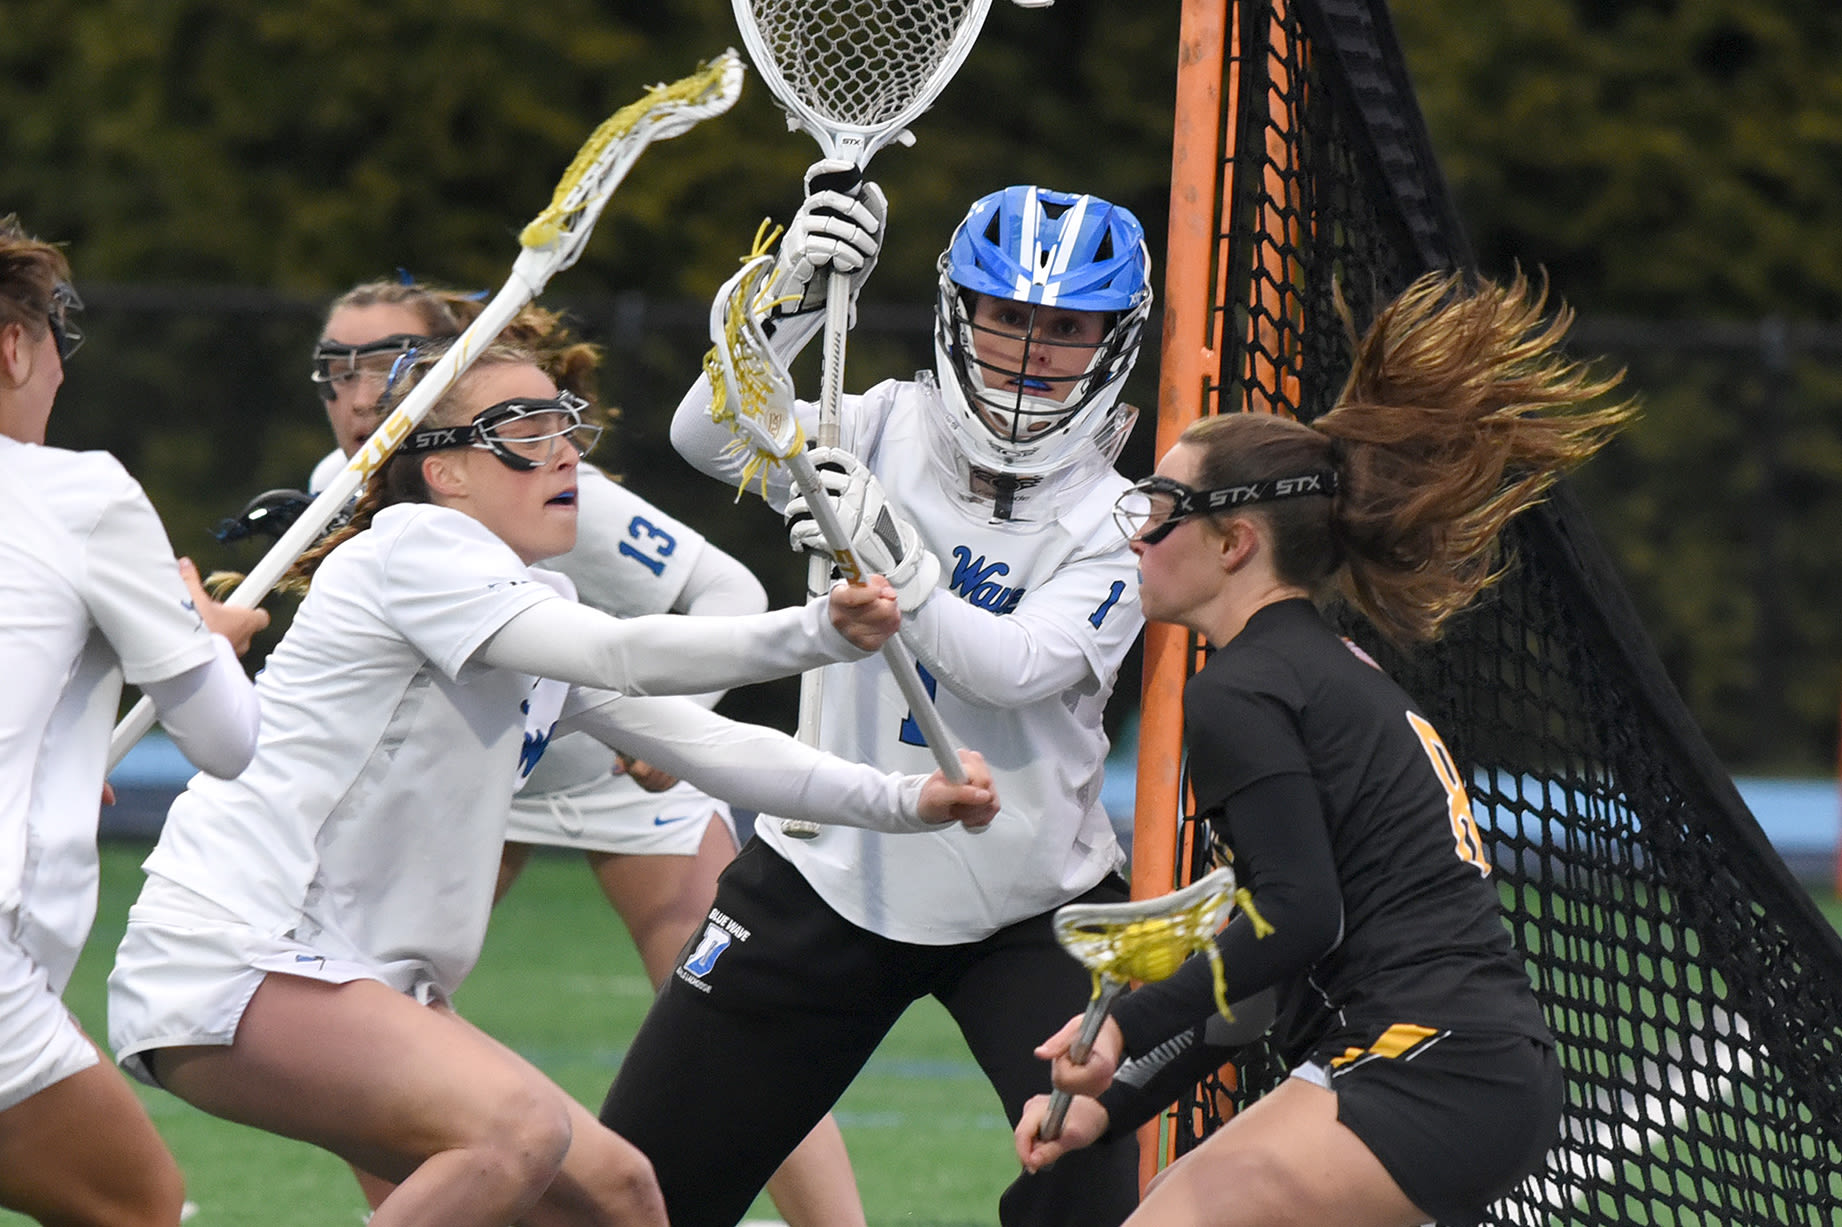 Connecticut girls lacrosse booming with Division I college commitments